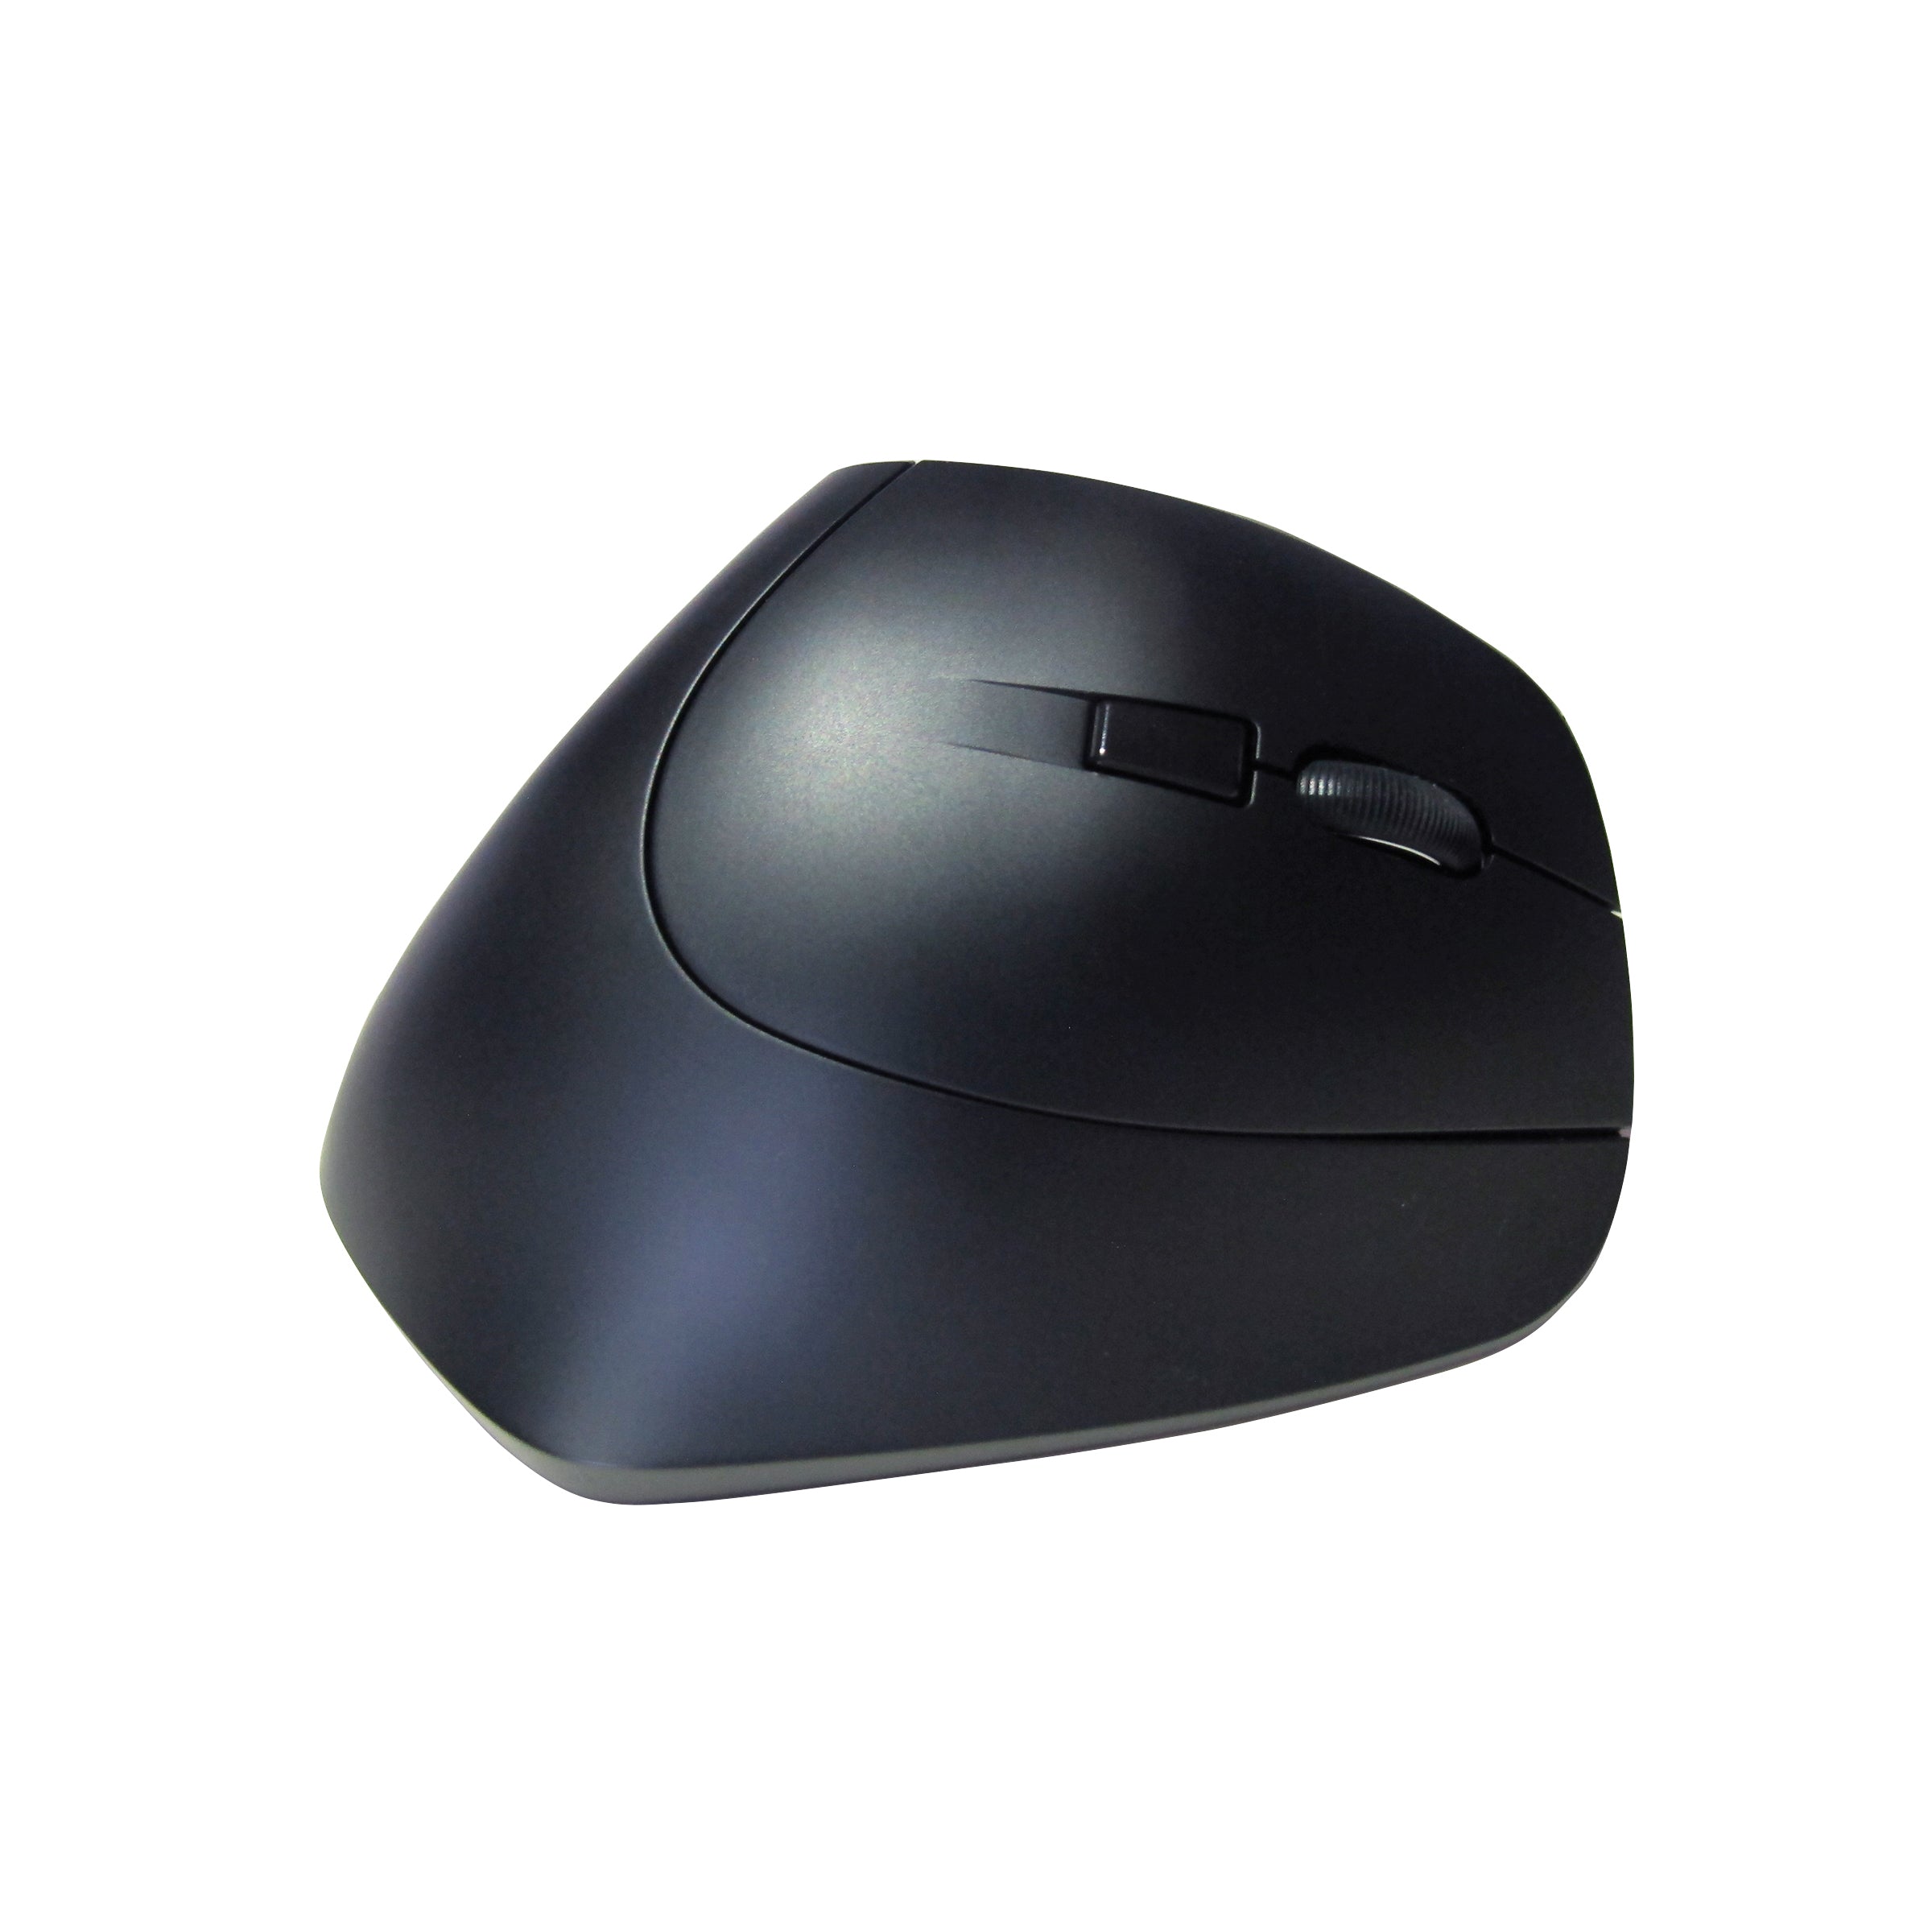 Bluetooth Wireless Mouse for Computer Mices Ergonomic Optical Mices Silent